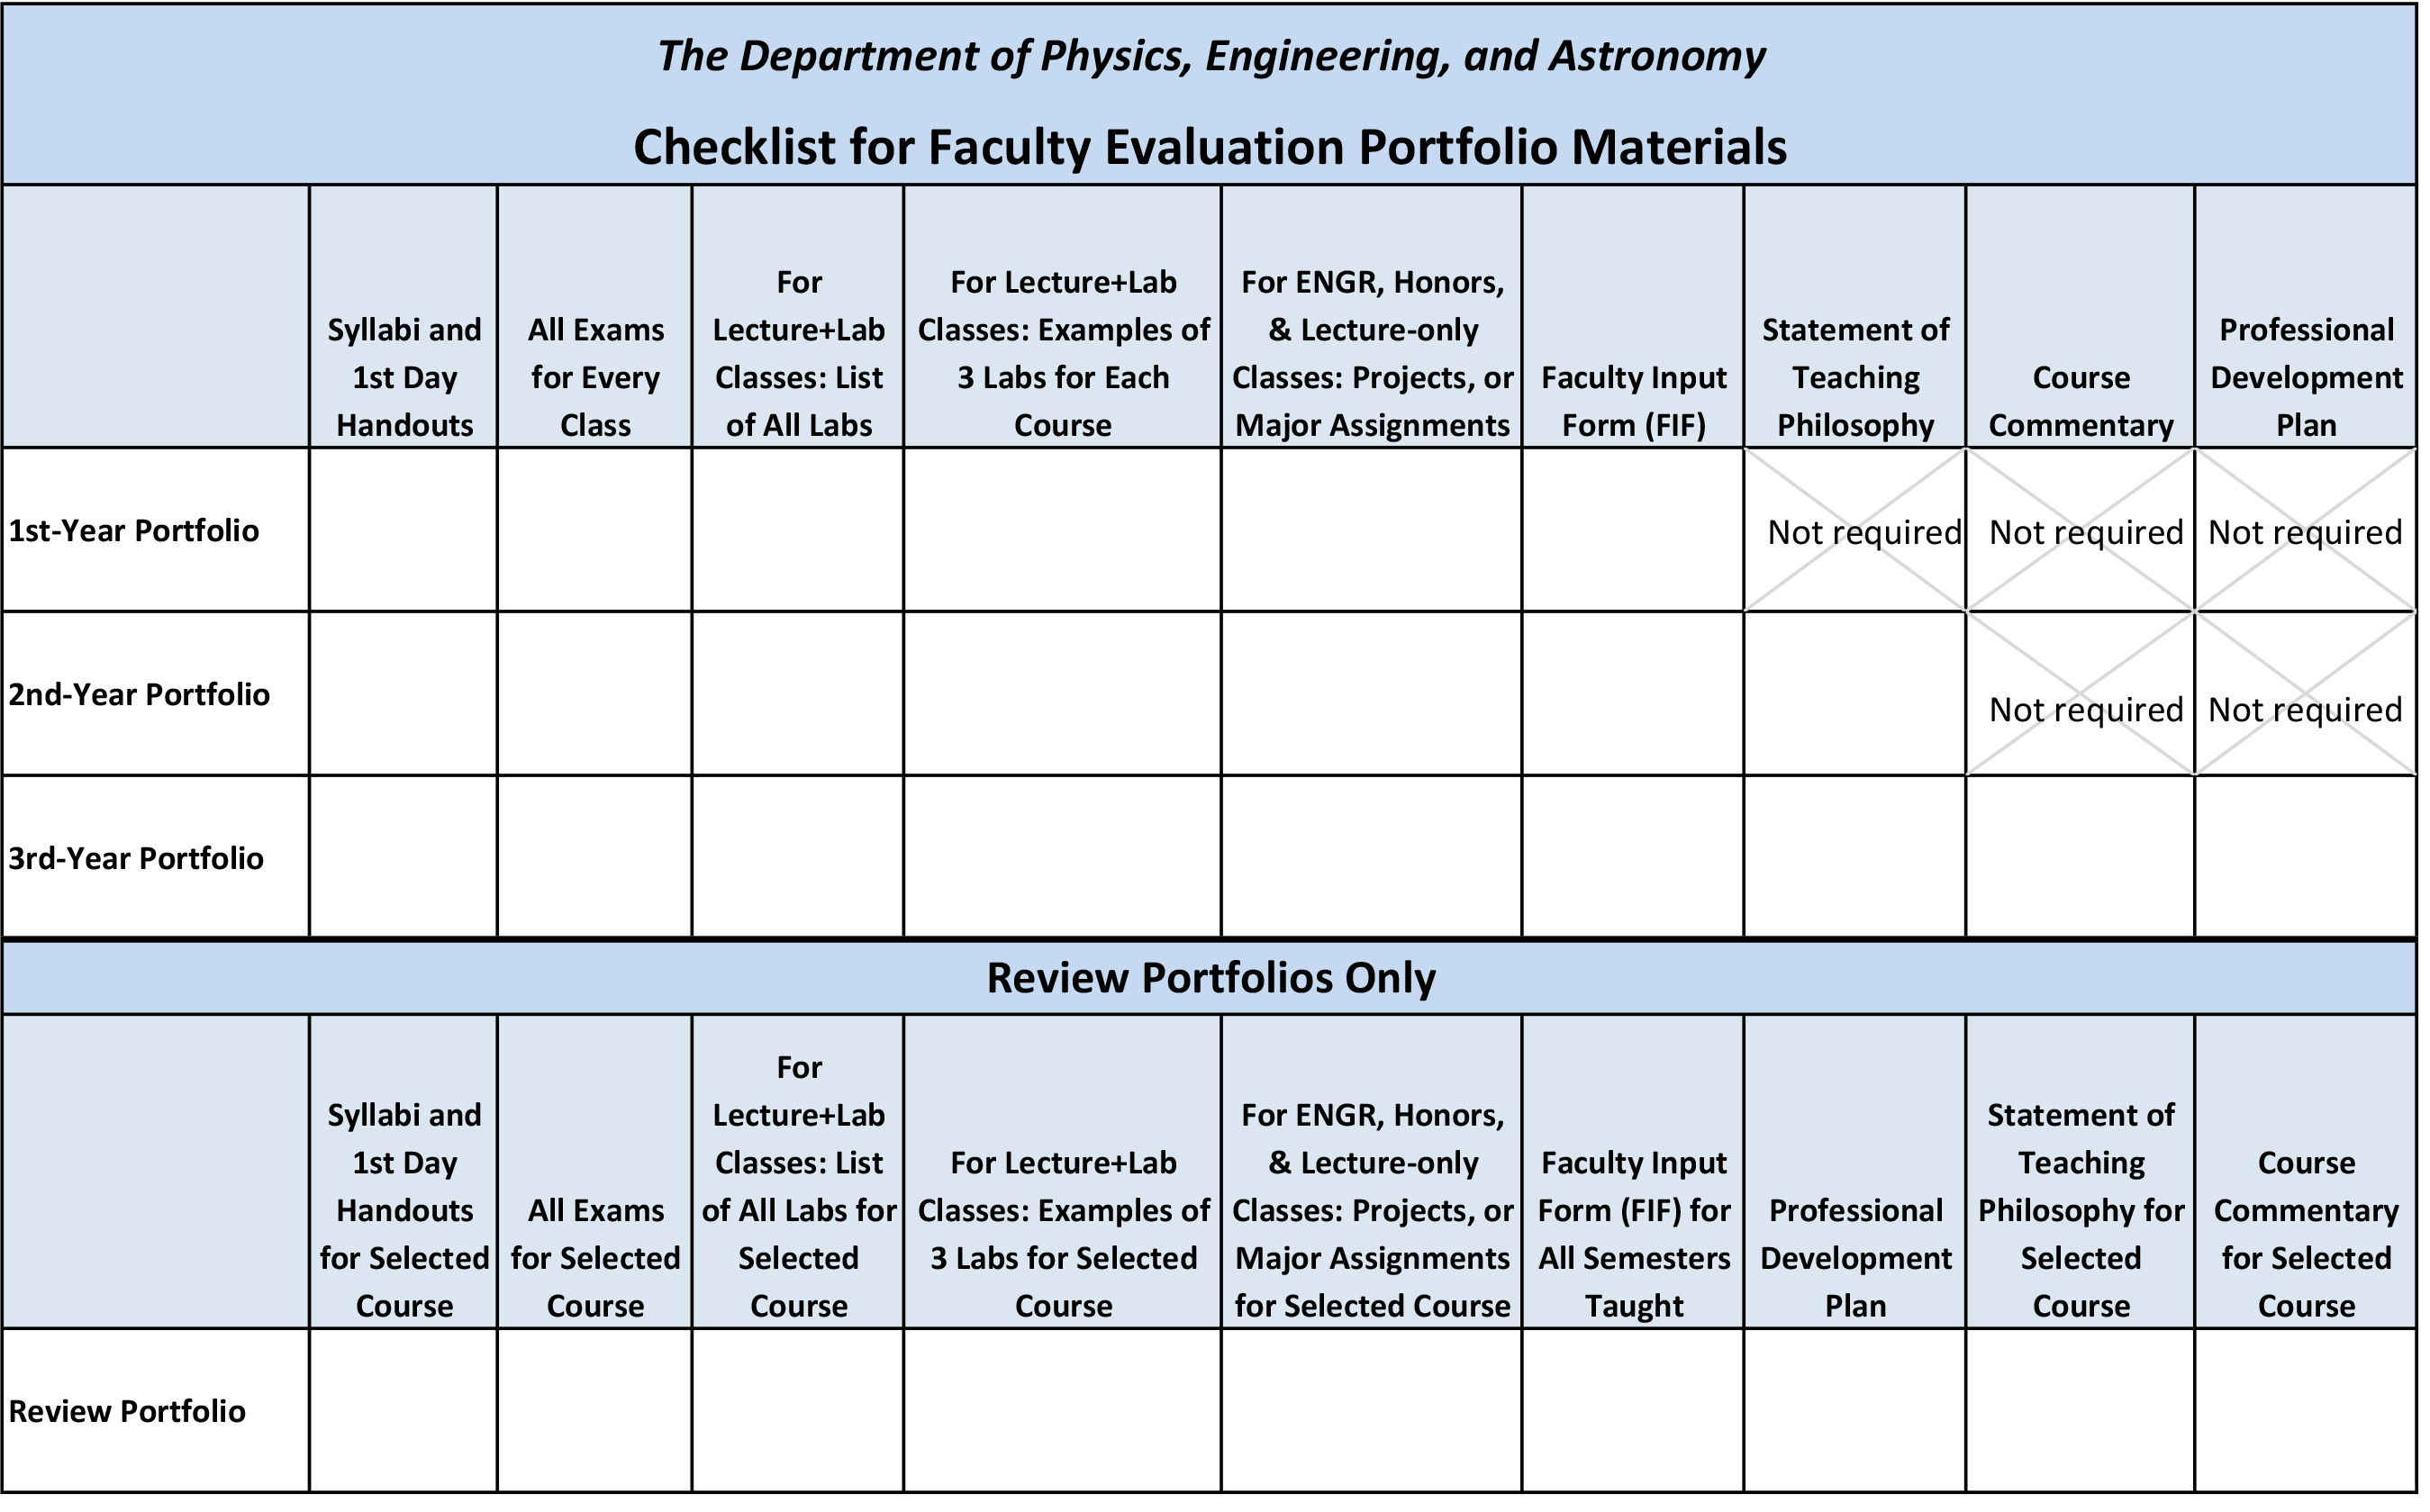 Example of the Checklist for Faculty Evaluation Portfolio Materials for the Department of Physics, Astronomy, and Engineering